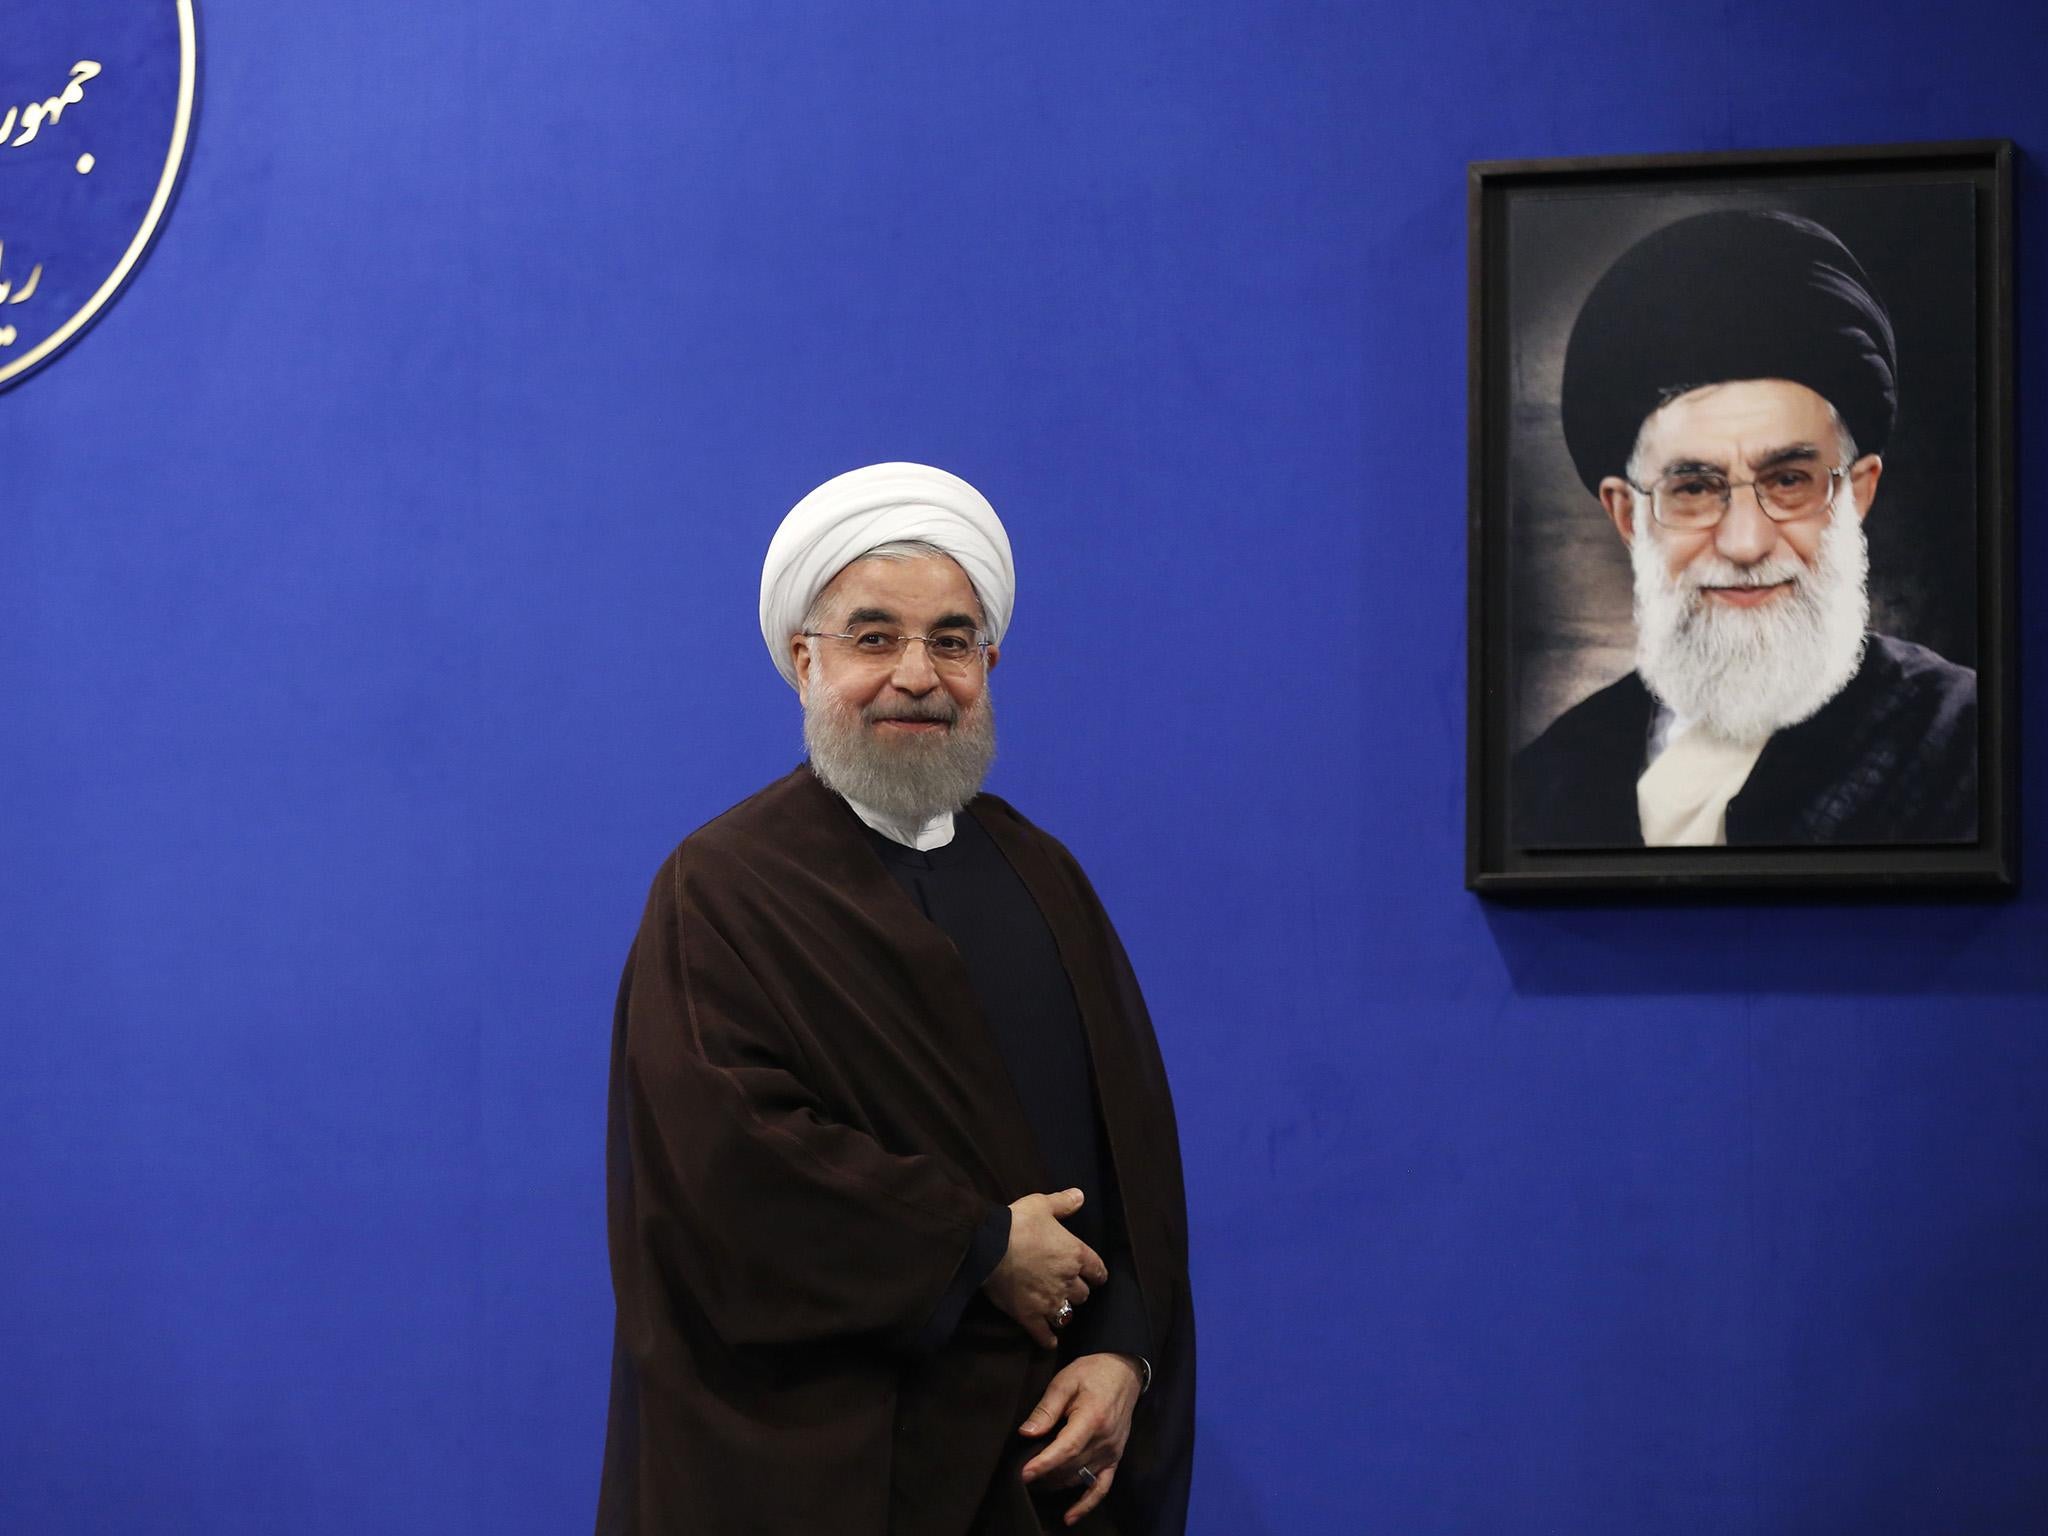 A 19 per cent margin of victory led to President Rouhani being re-elected for a second term